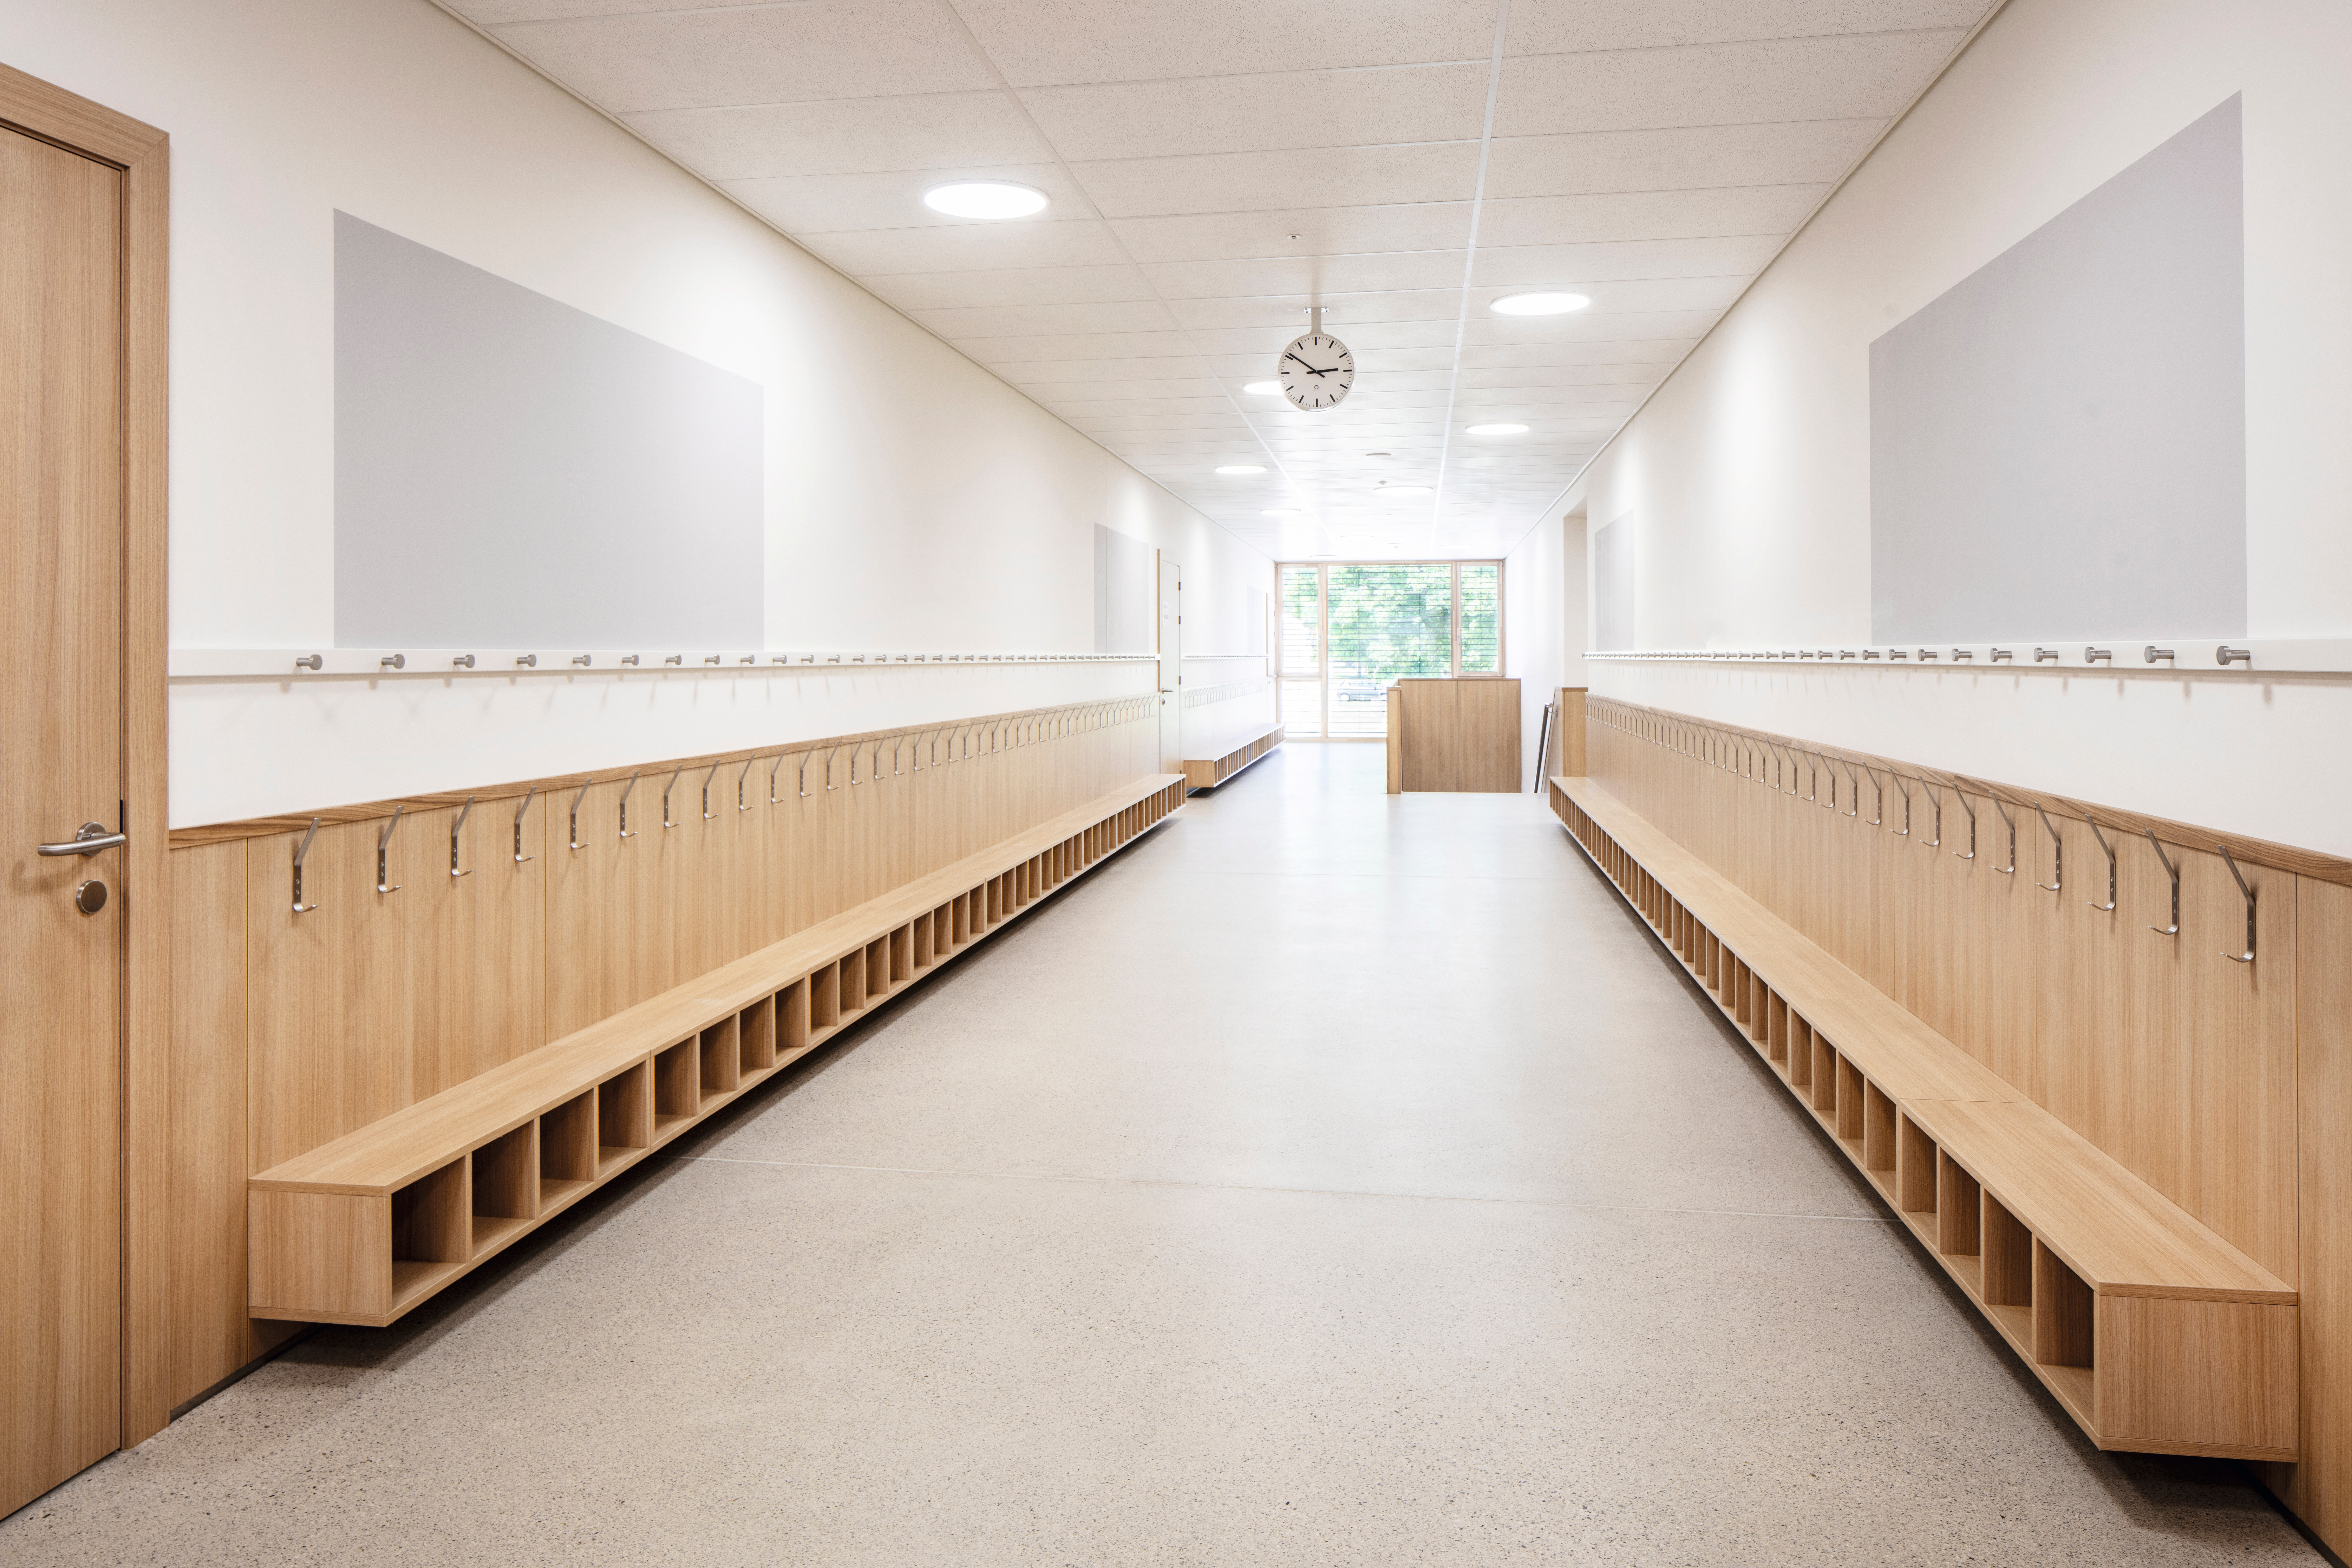 Eurodekor Flammex, wall cladding and cloakroom in a primary school